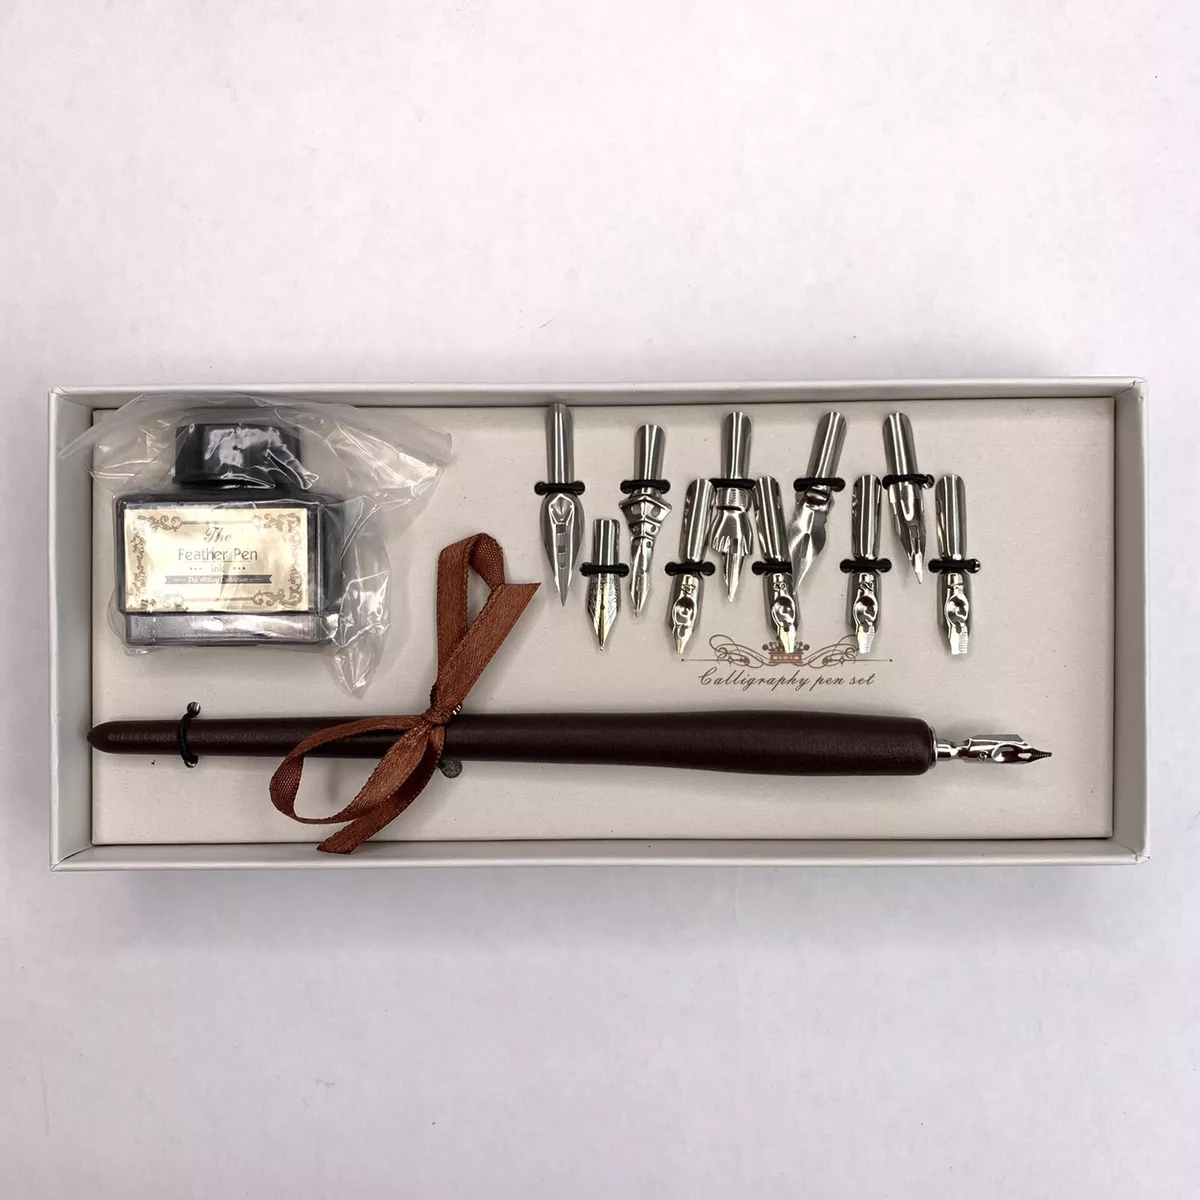 Calligraphy Pen Set - 10 Attachments The Feather Pen Ink The Writing  Collection